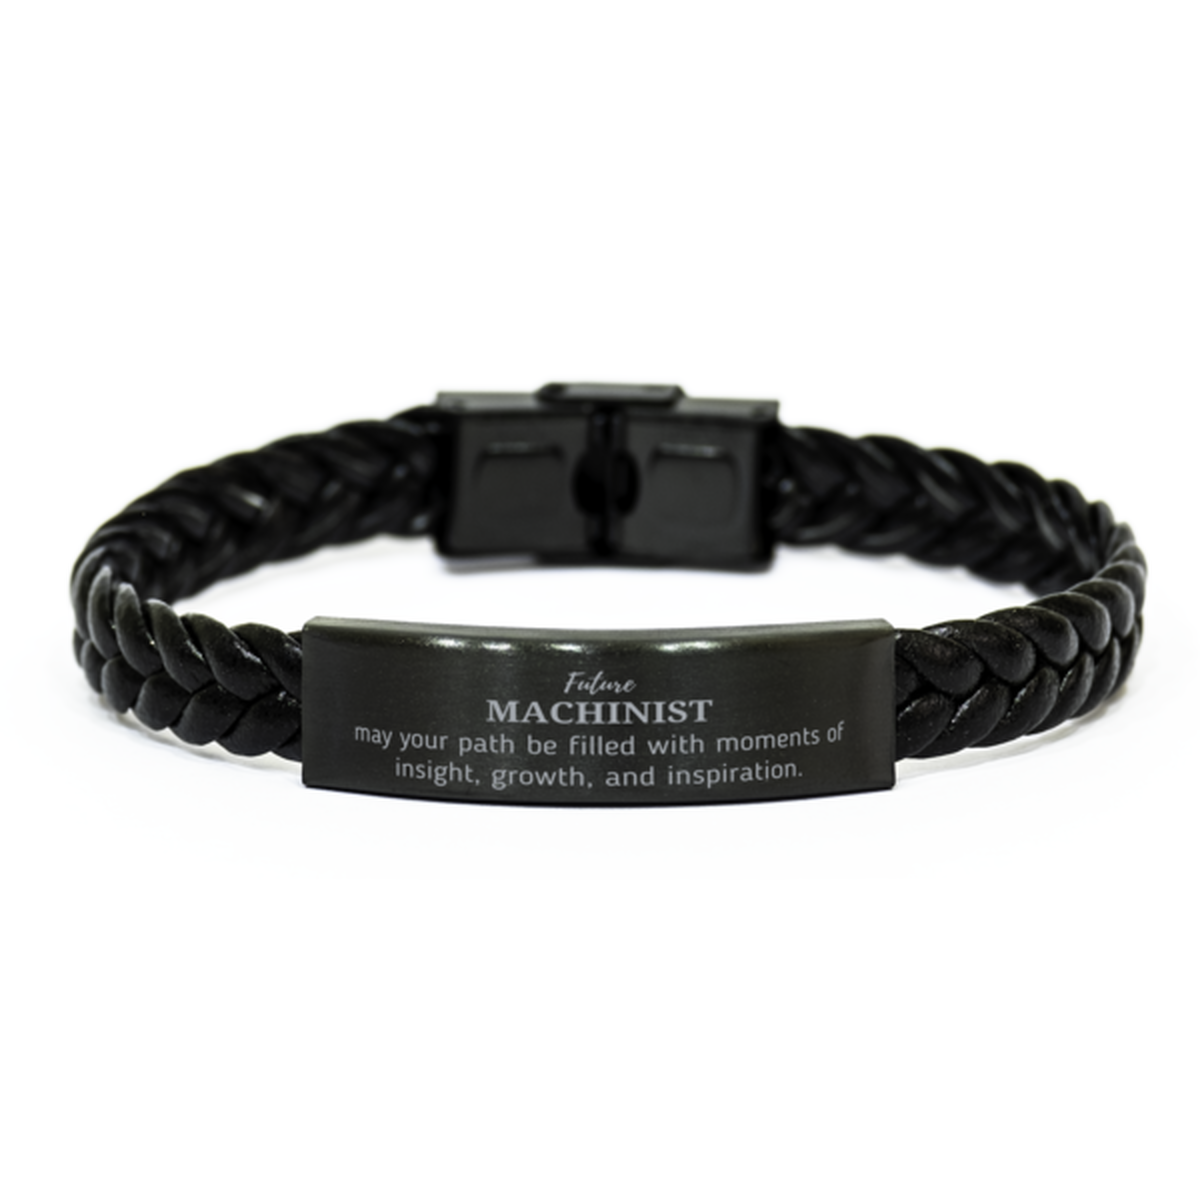 Future Machinist Gifts, May your path be filled with moments of insight, Graduation Gifts for New Machinist, Christmas Unique Braided Leather Bracelet For Men, Women, Friends